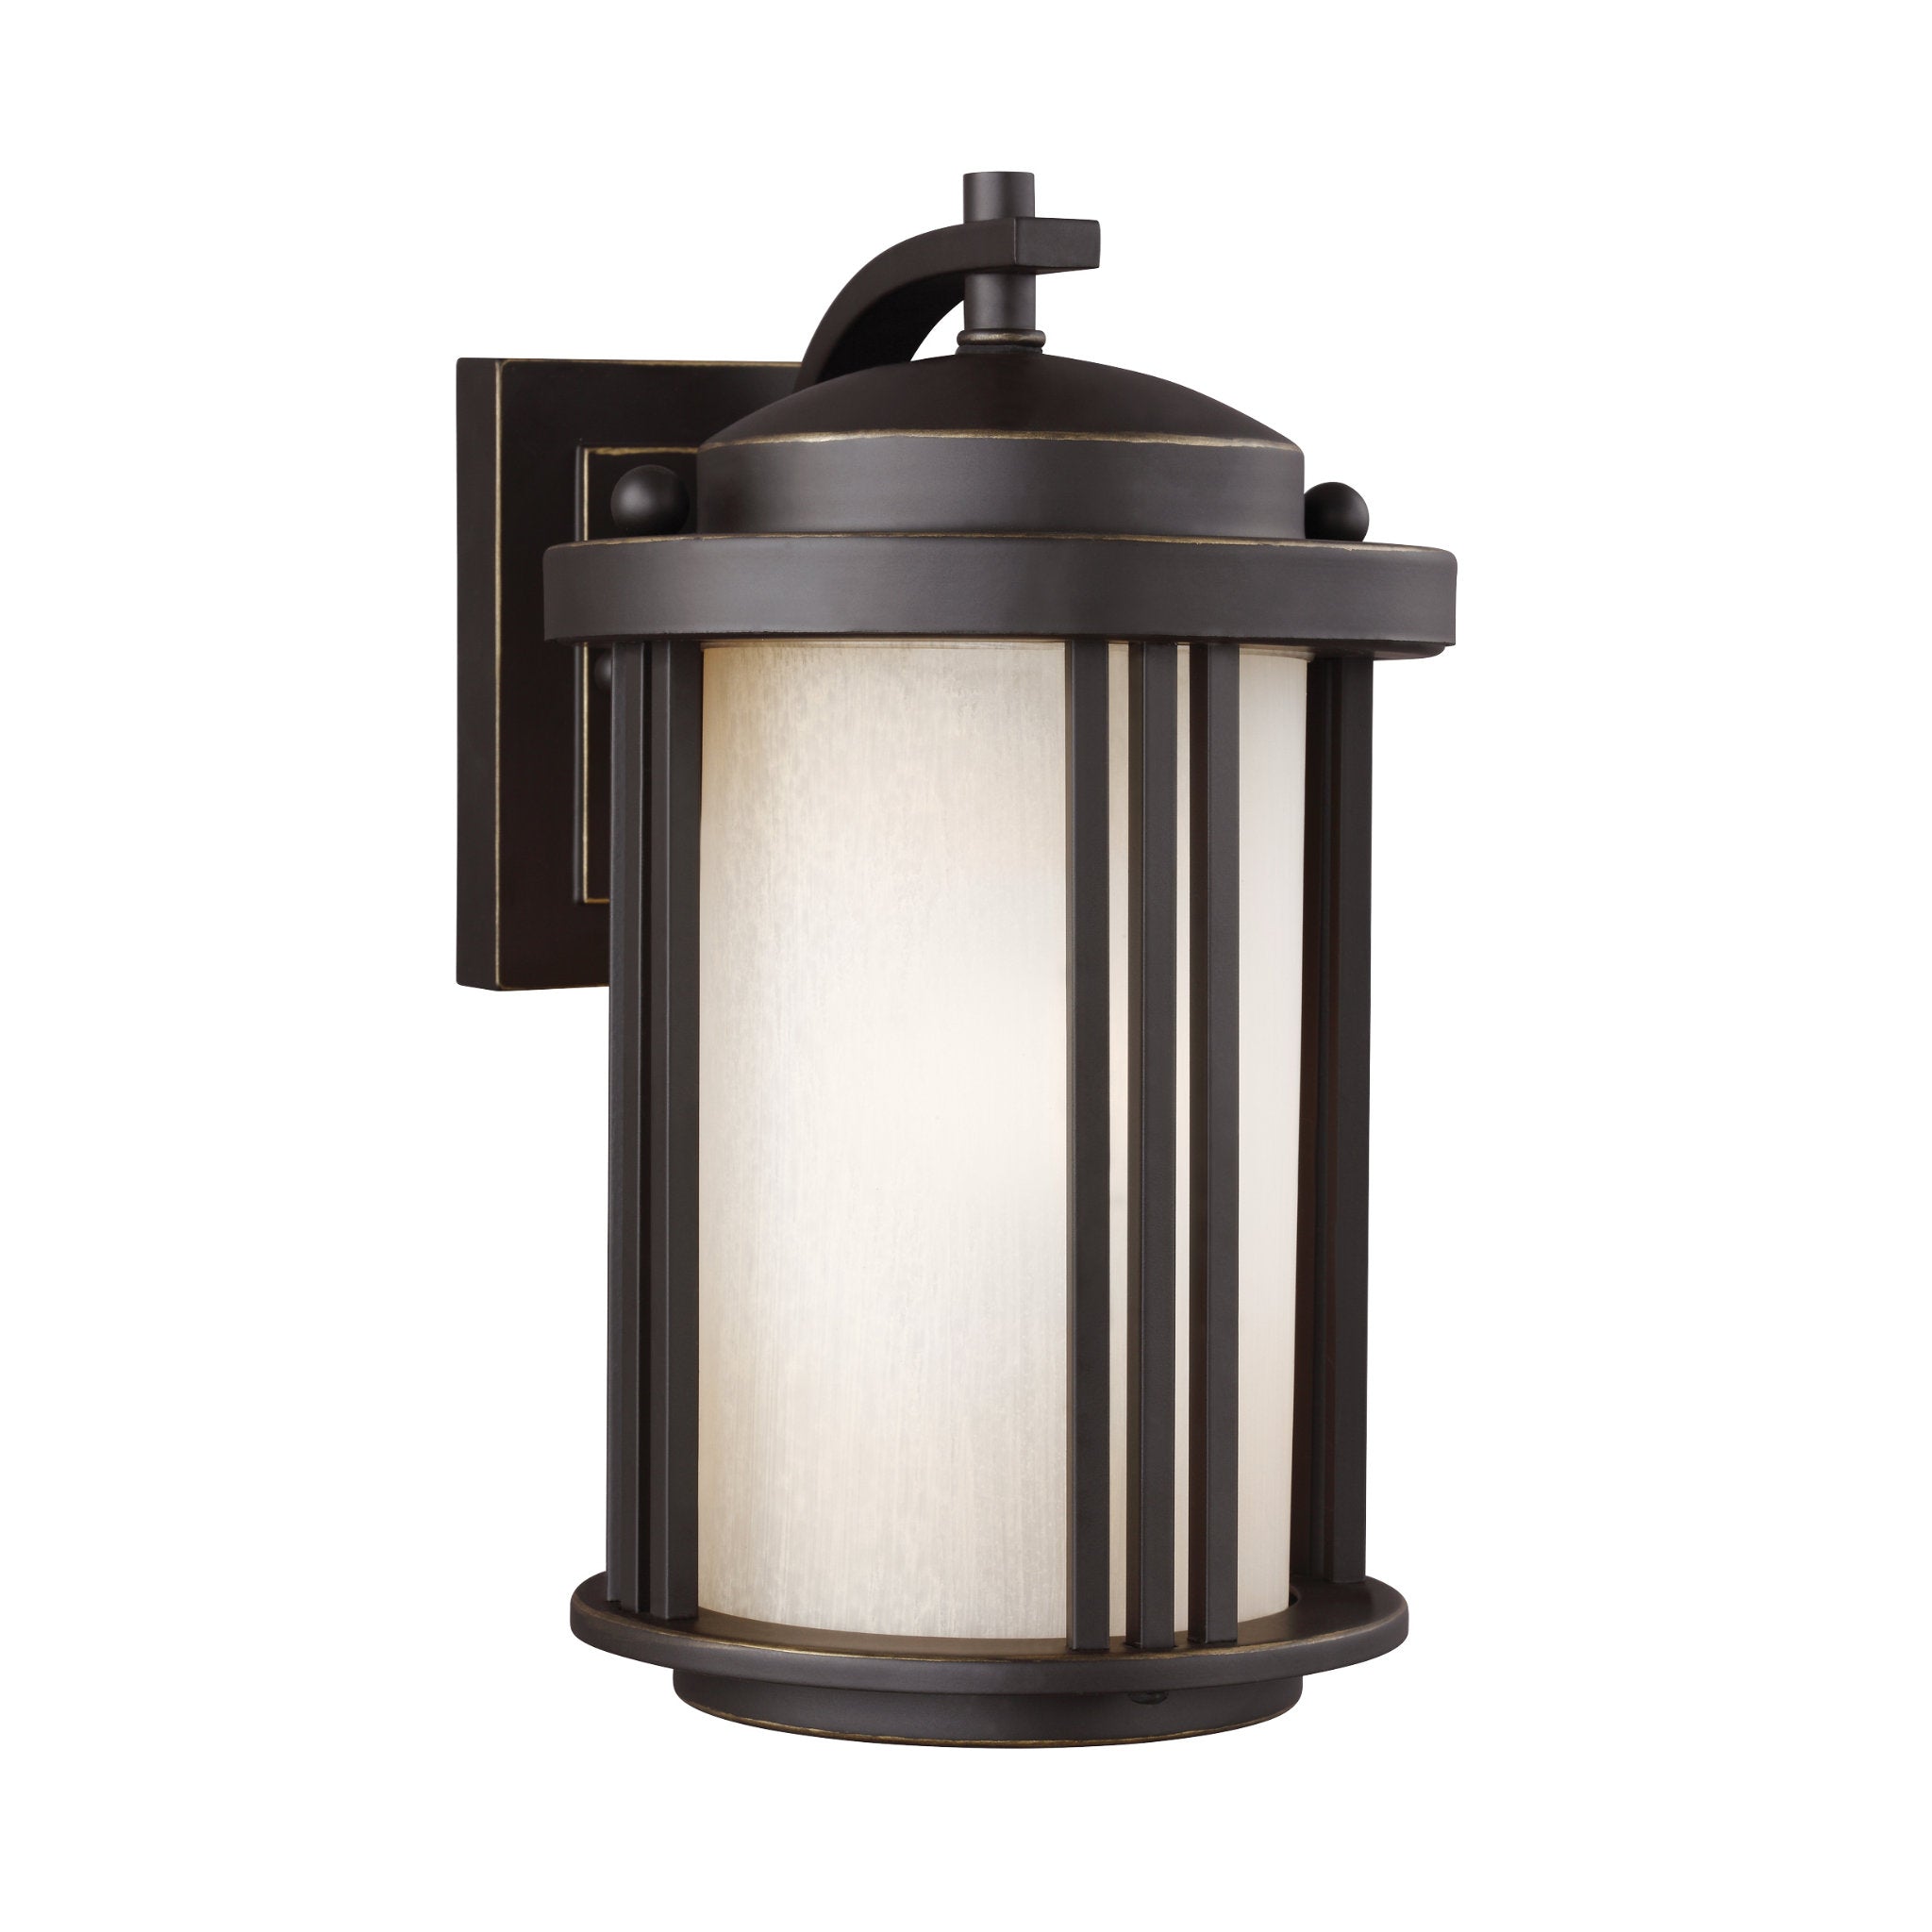 Crowell Small One Light Outdoor Wall Lantern Contemporary Fixture 6" Width 10" Height Aluminum Round Creme Parchment Shade in Antique Bronze